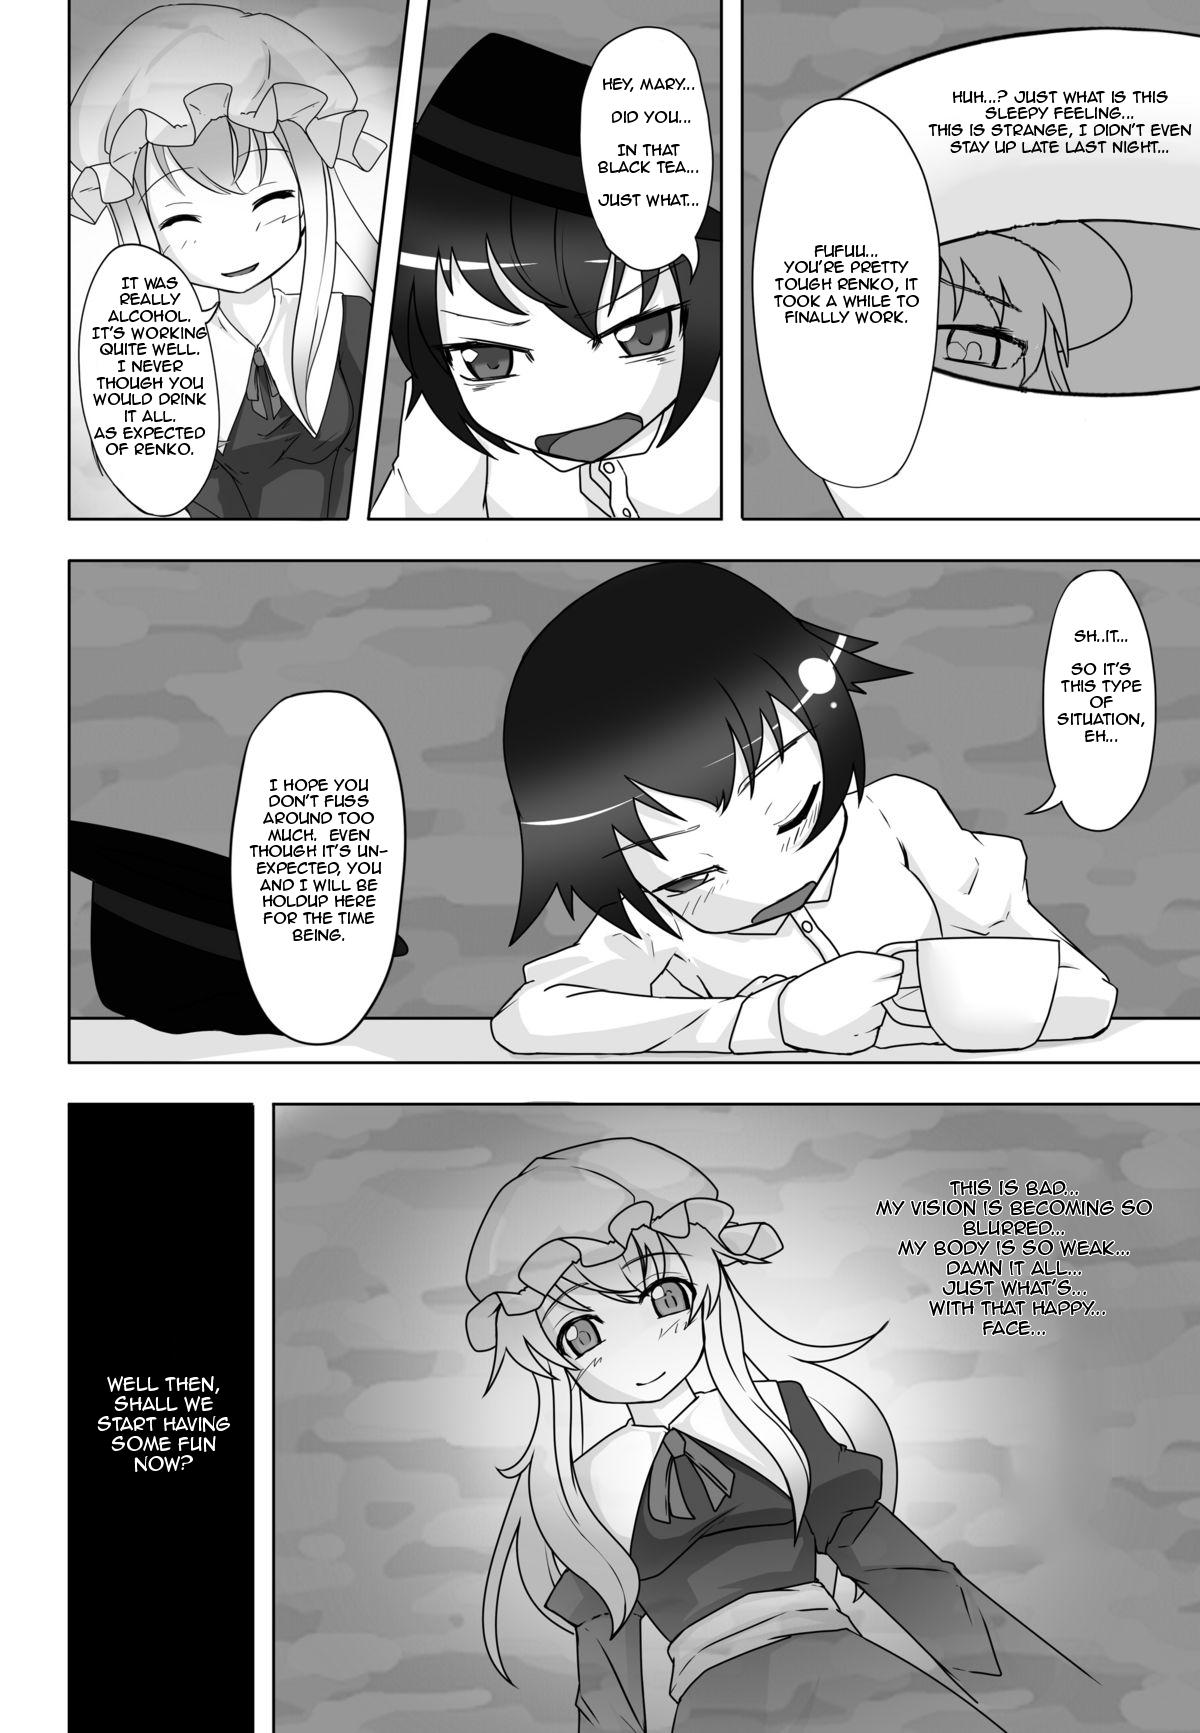 POV 2nd Skin Vol. 1 - Touhou project Jacking Off - Page 3